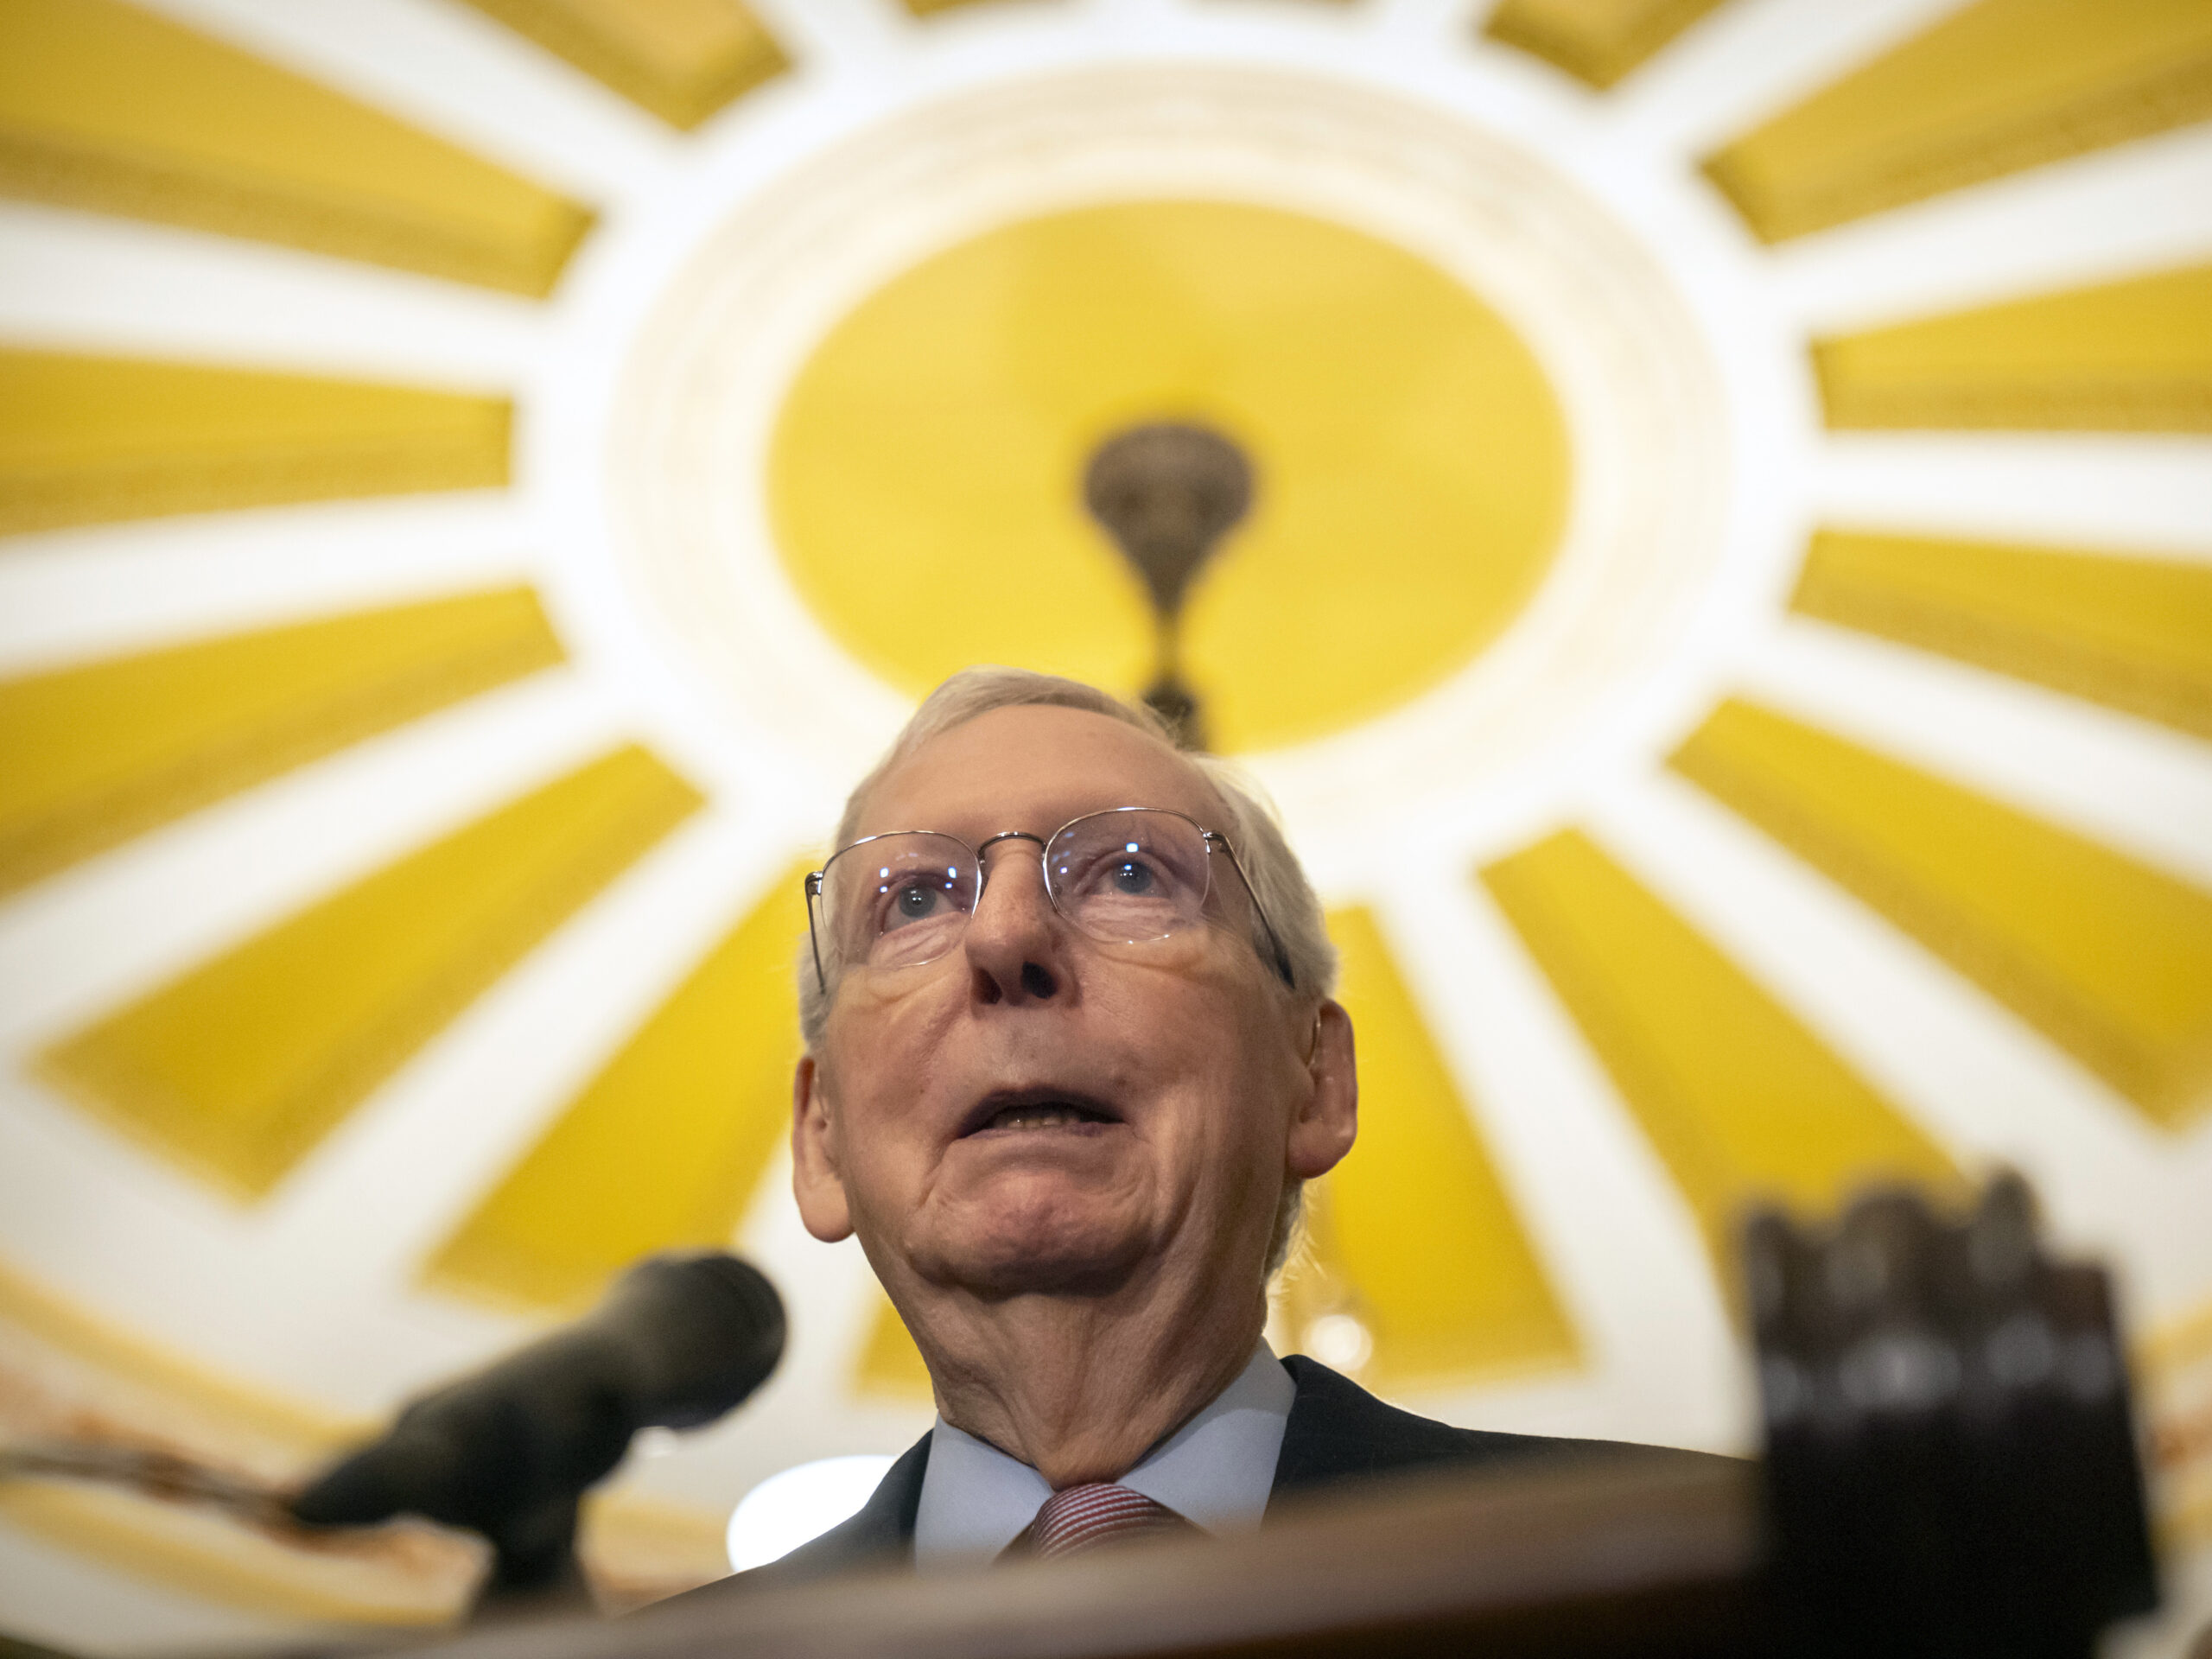 Senate Minority Leader Mitch McConnell will step down as leader in November.